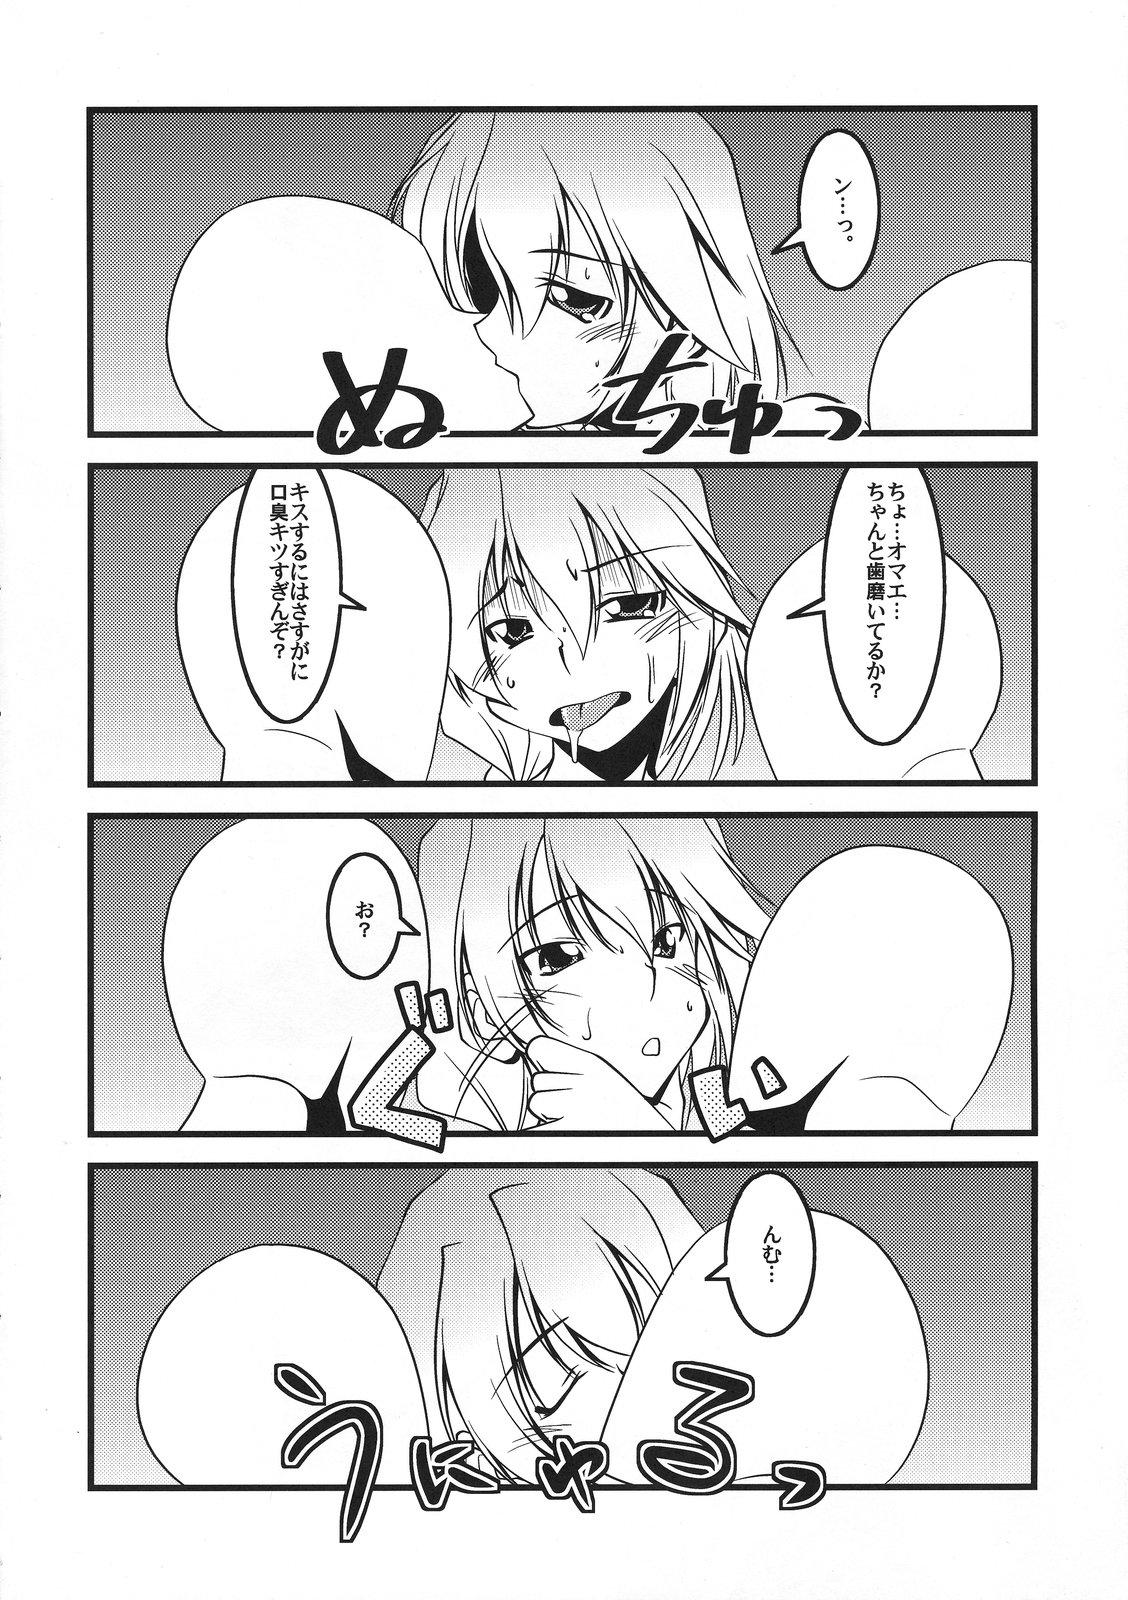 Pussylicking 恋虐／虐恋 - Touhou project Ride - Page 4